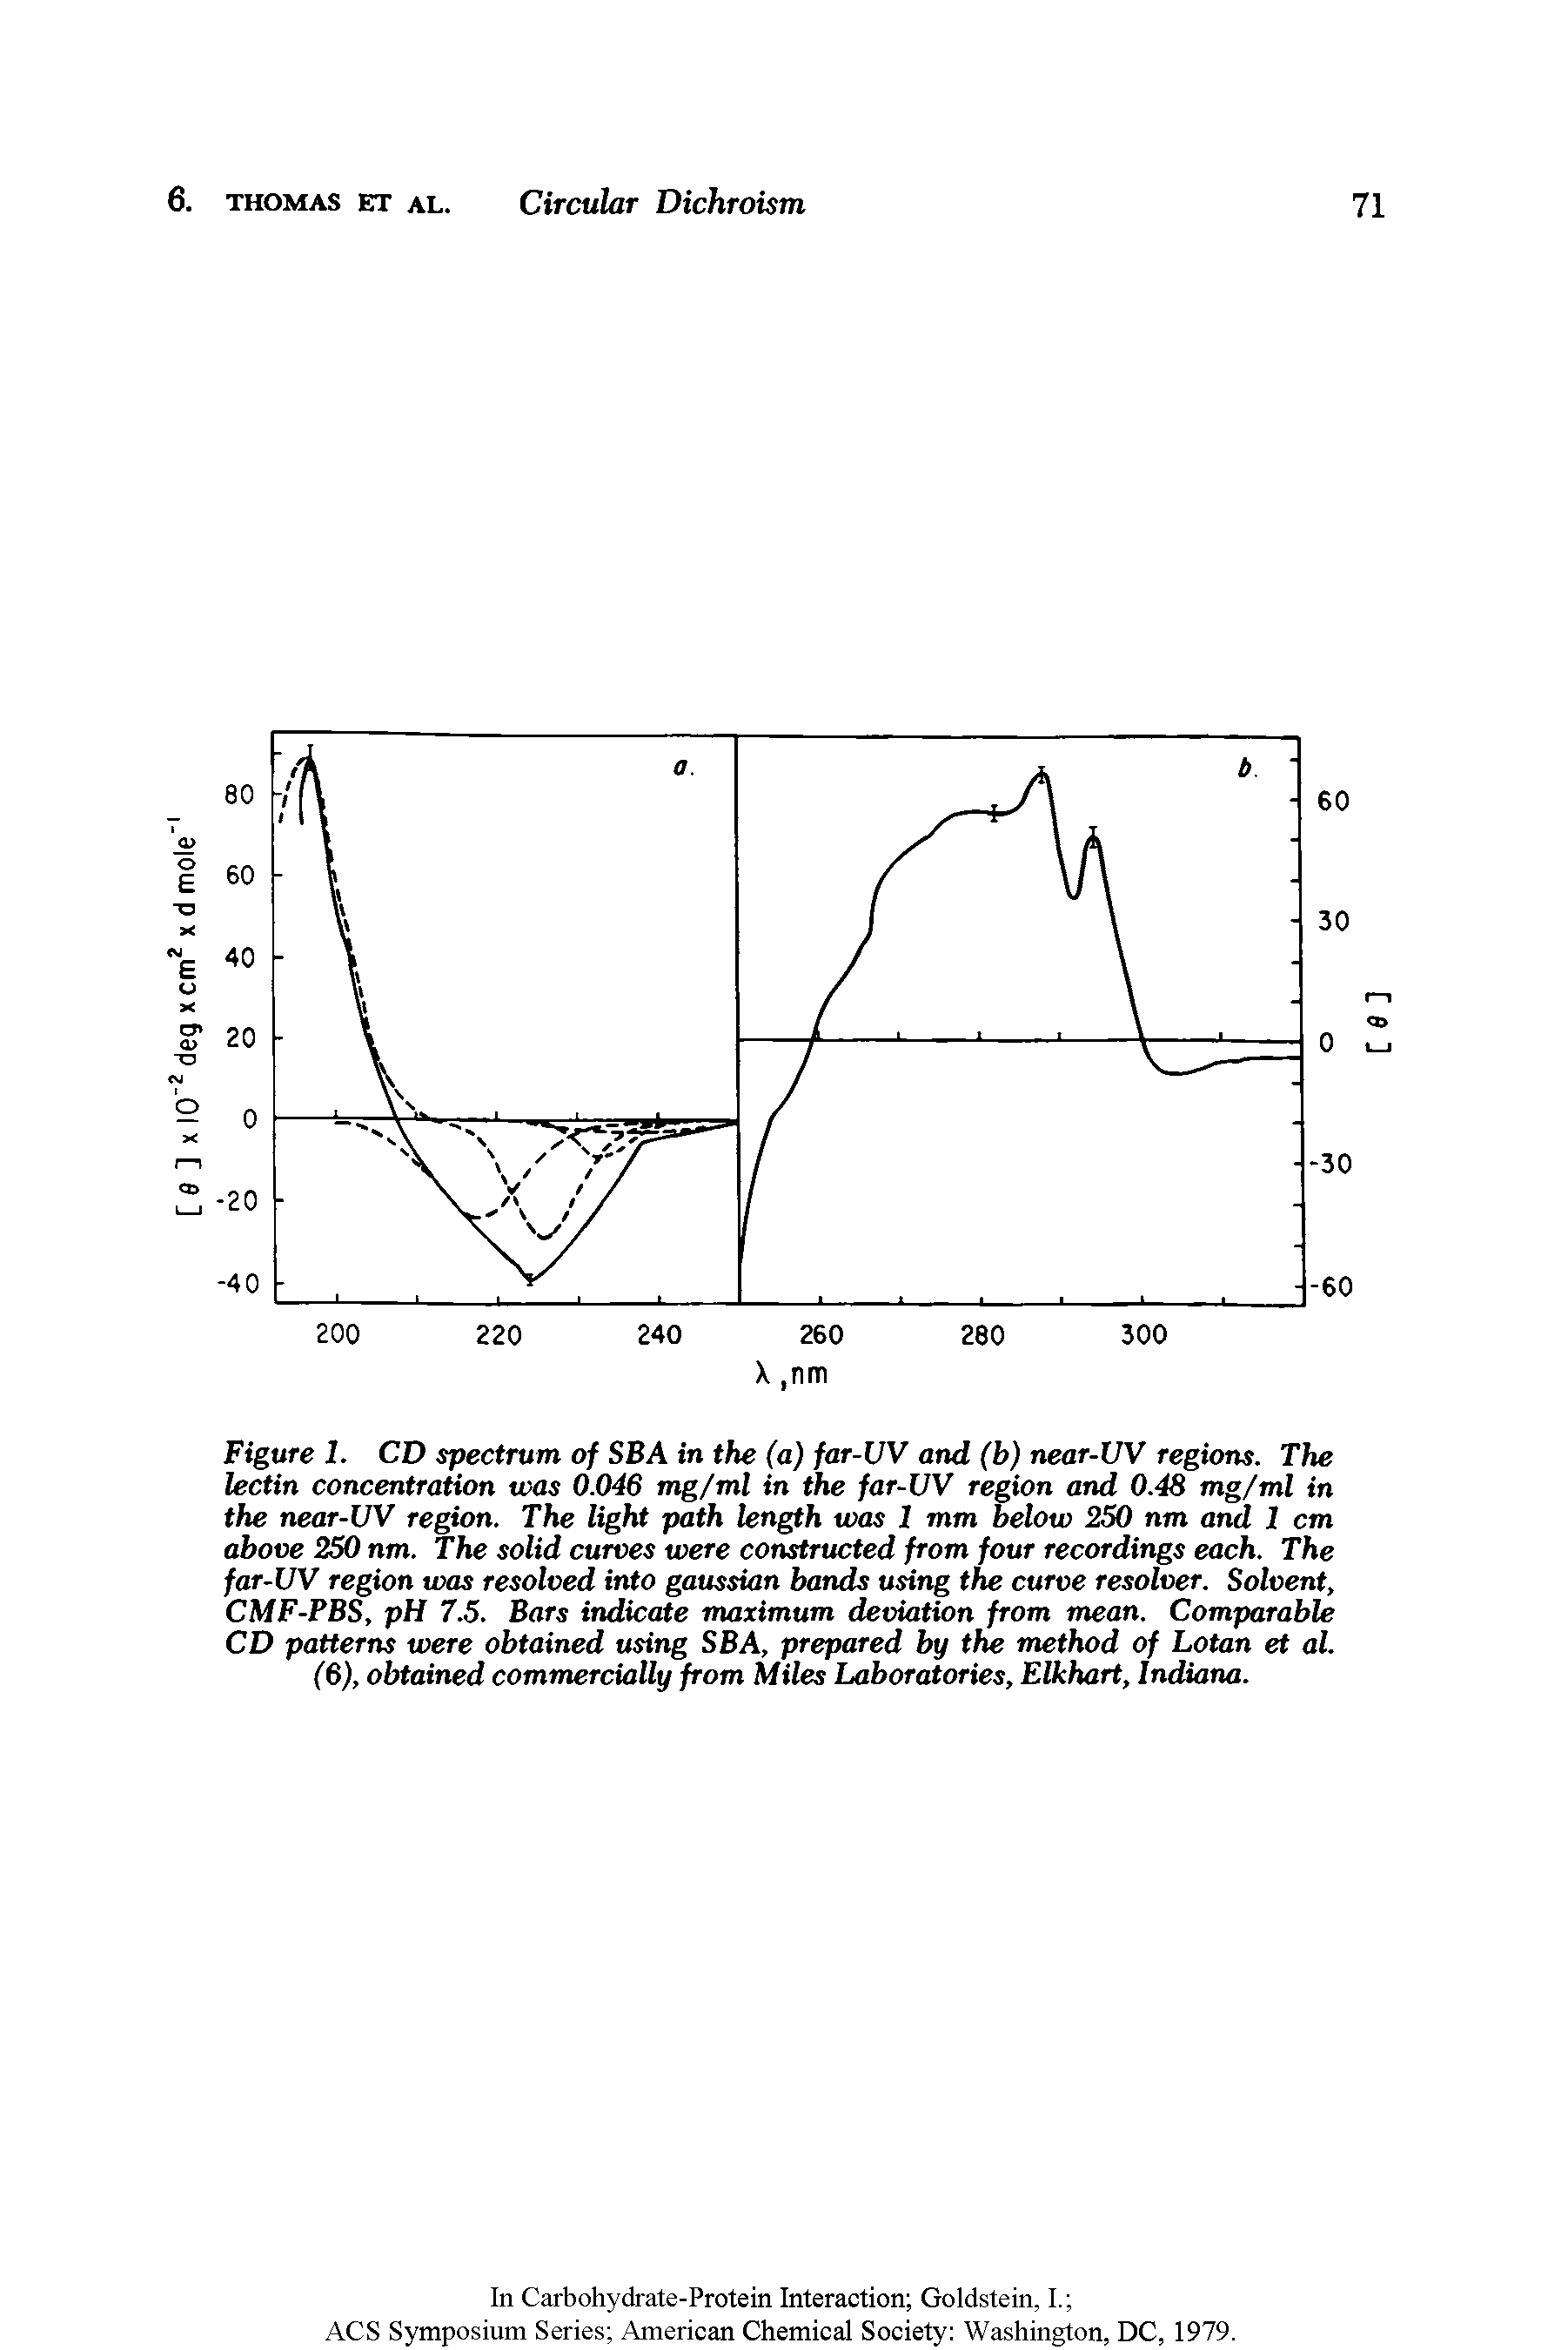 Figure 1. CD spectrum of SBA in the (a) far-UV and (b) near-UV regions. The lectin concentration was 0.046 mg/ml in the far-UV region and 0.48 mg/ml in the near-UV region. The light path length was 1 mm below 250 nm and 1 cm above 250 nm. The solid curves were constructed from four recordings each. The far-UV region was resolved into gaussian bands using the curve resolver. Solvent, CMF-PBS, pH 7.5. Bars indicate maximum deviation from mean. Comparable CD patterns were obtained using SBA, prepared by the method of Lotan et al.